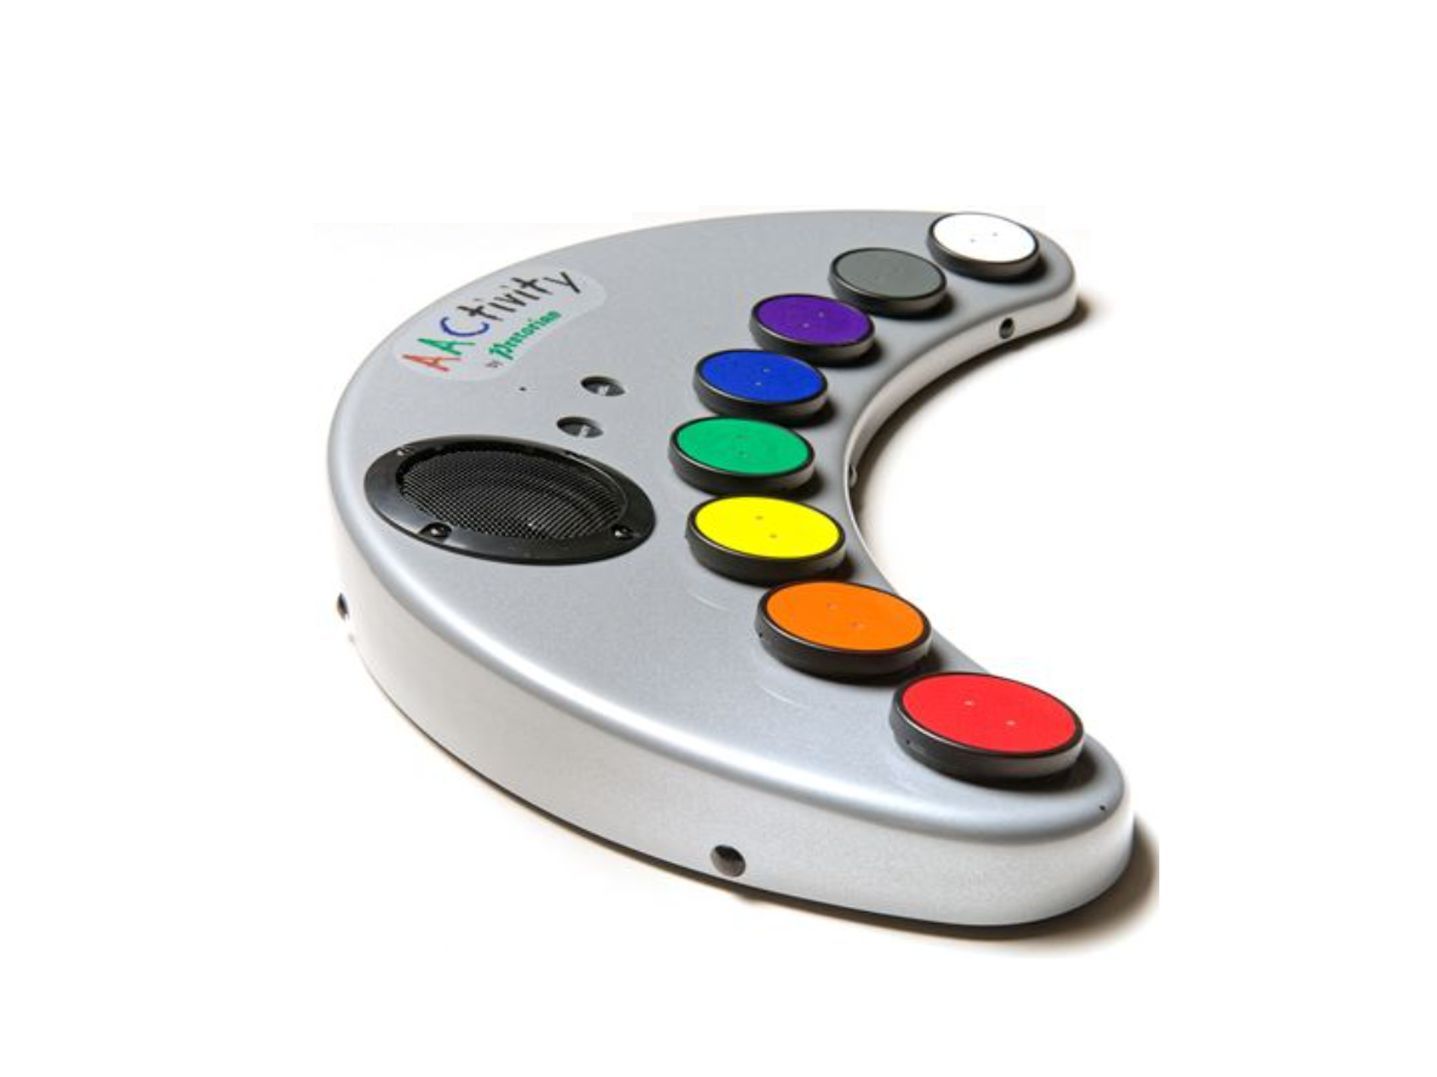 AACtivity Communicator and Musical Instrument, in the shape of a crescent moon, with 8 large buttons in different colours and a built-in speaker on top.